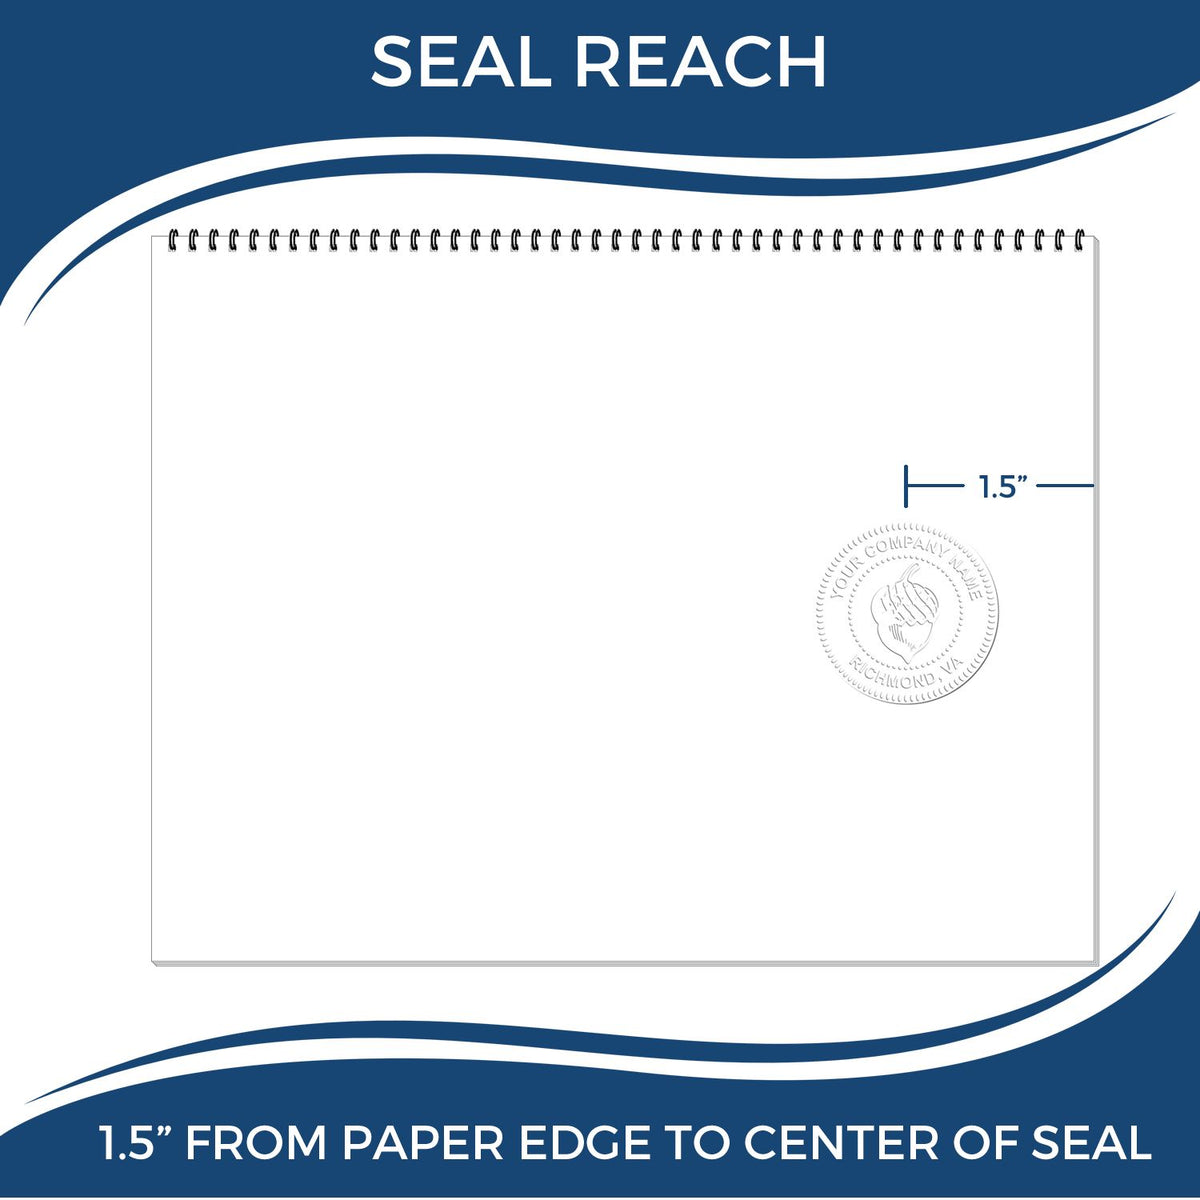 An infographic showing the seal reach which is represented by a ruler and a miniature seal image of the Gift Oklahoma Geologist Seal